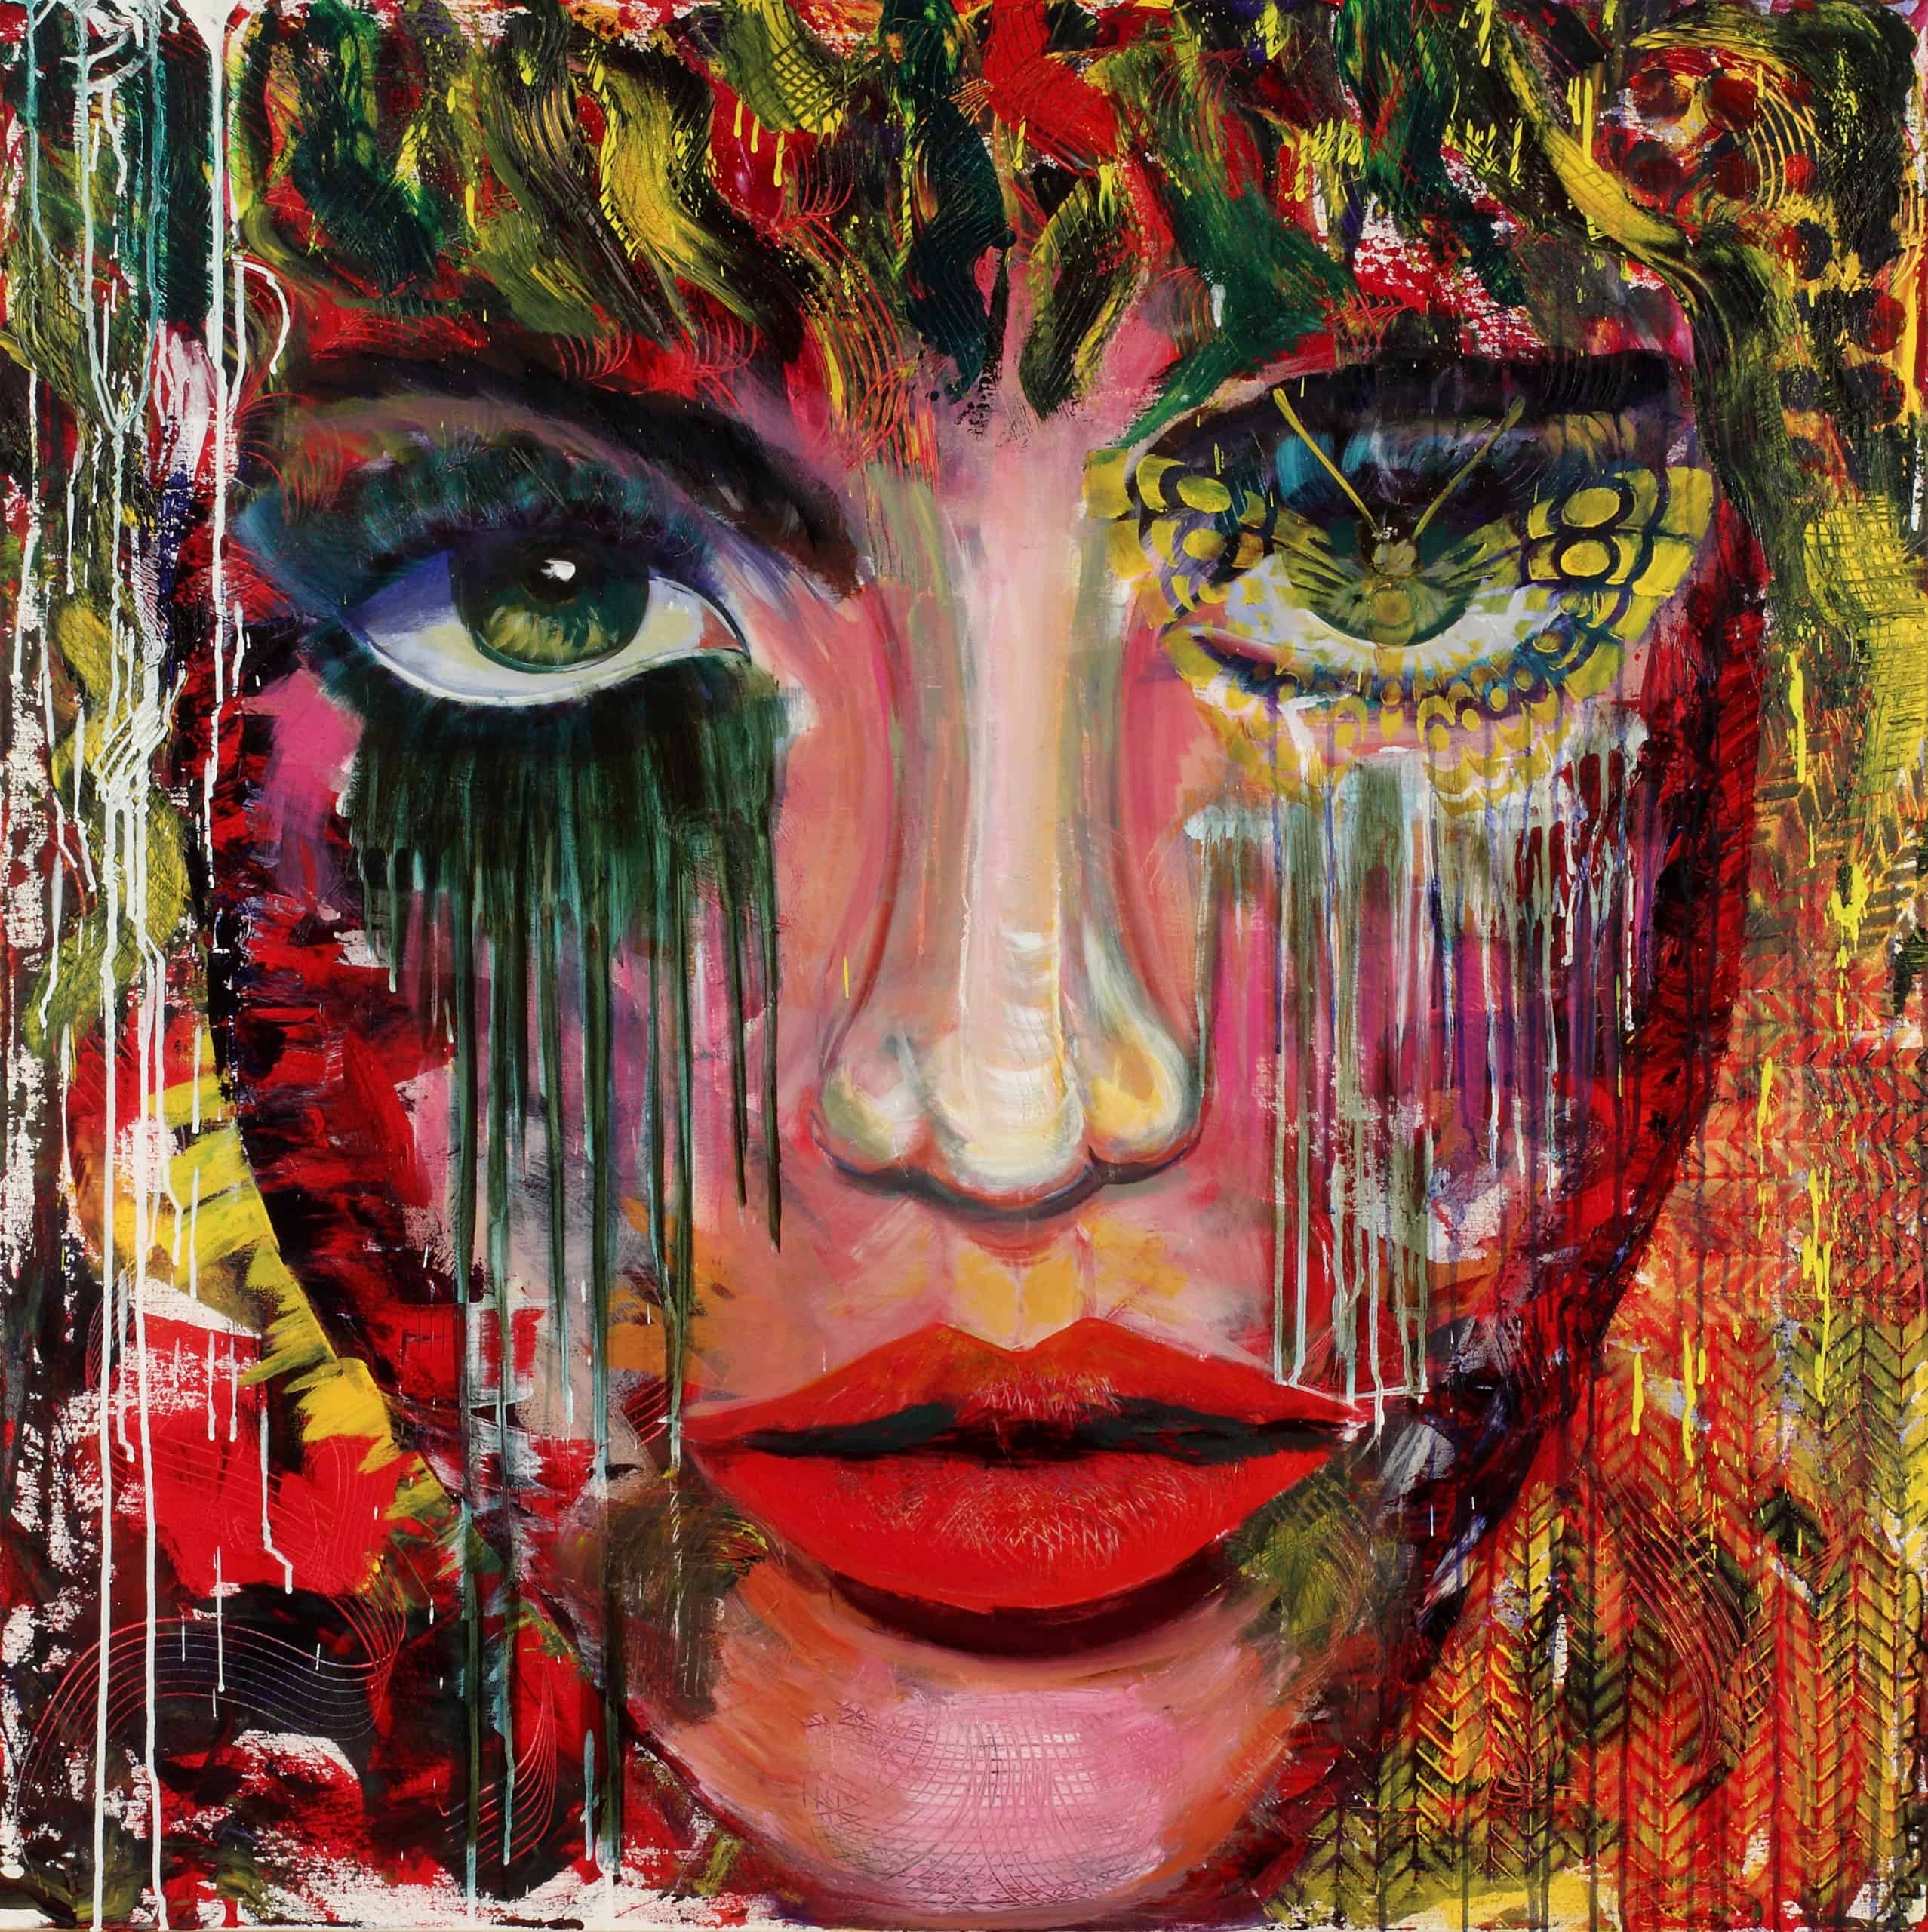 Noise That Beauty Can Be - Original Portrait Artwork by Ronit Galazan at RonitGallery